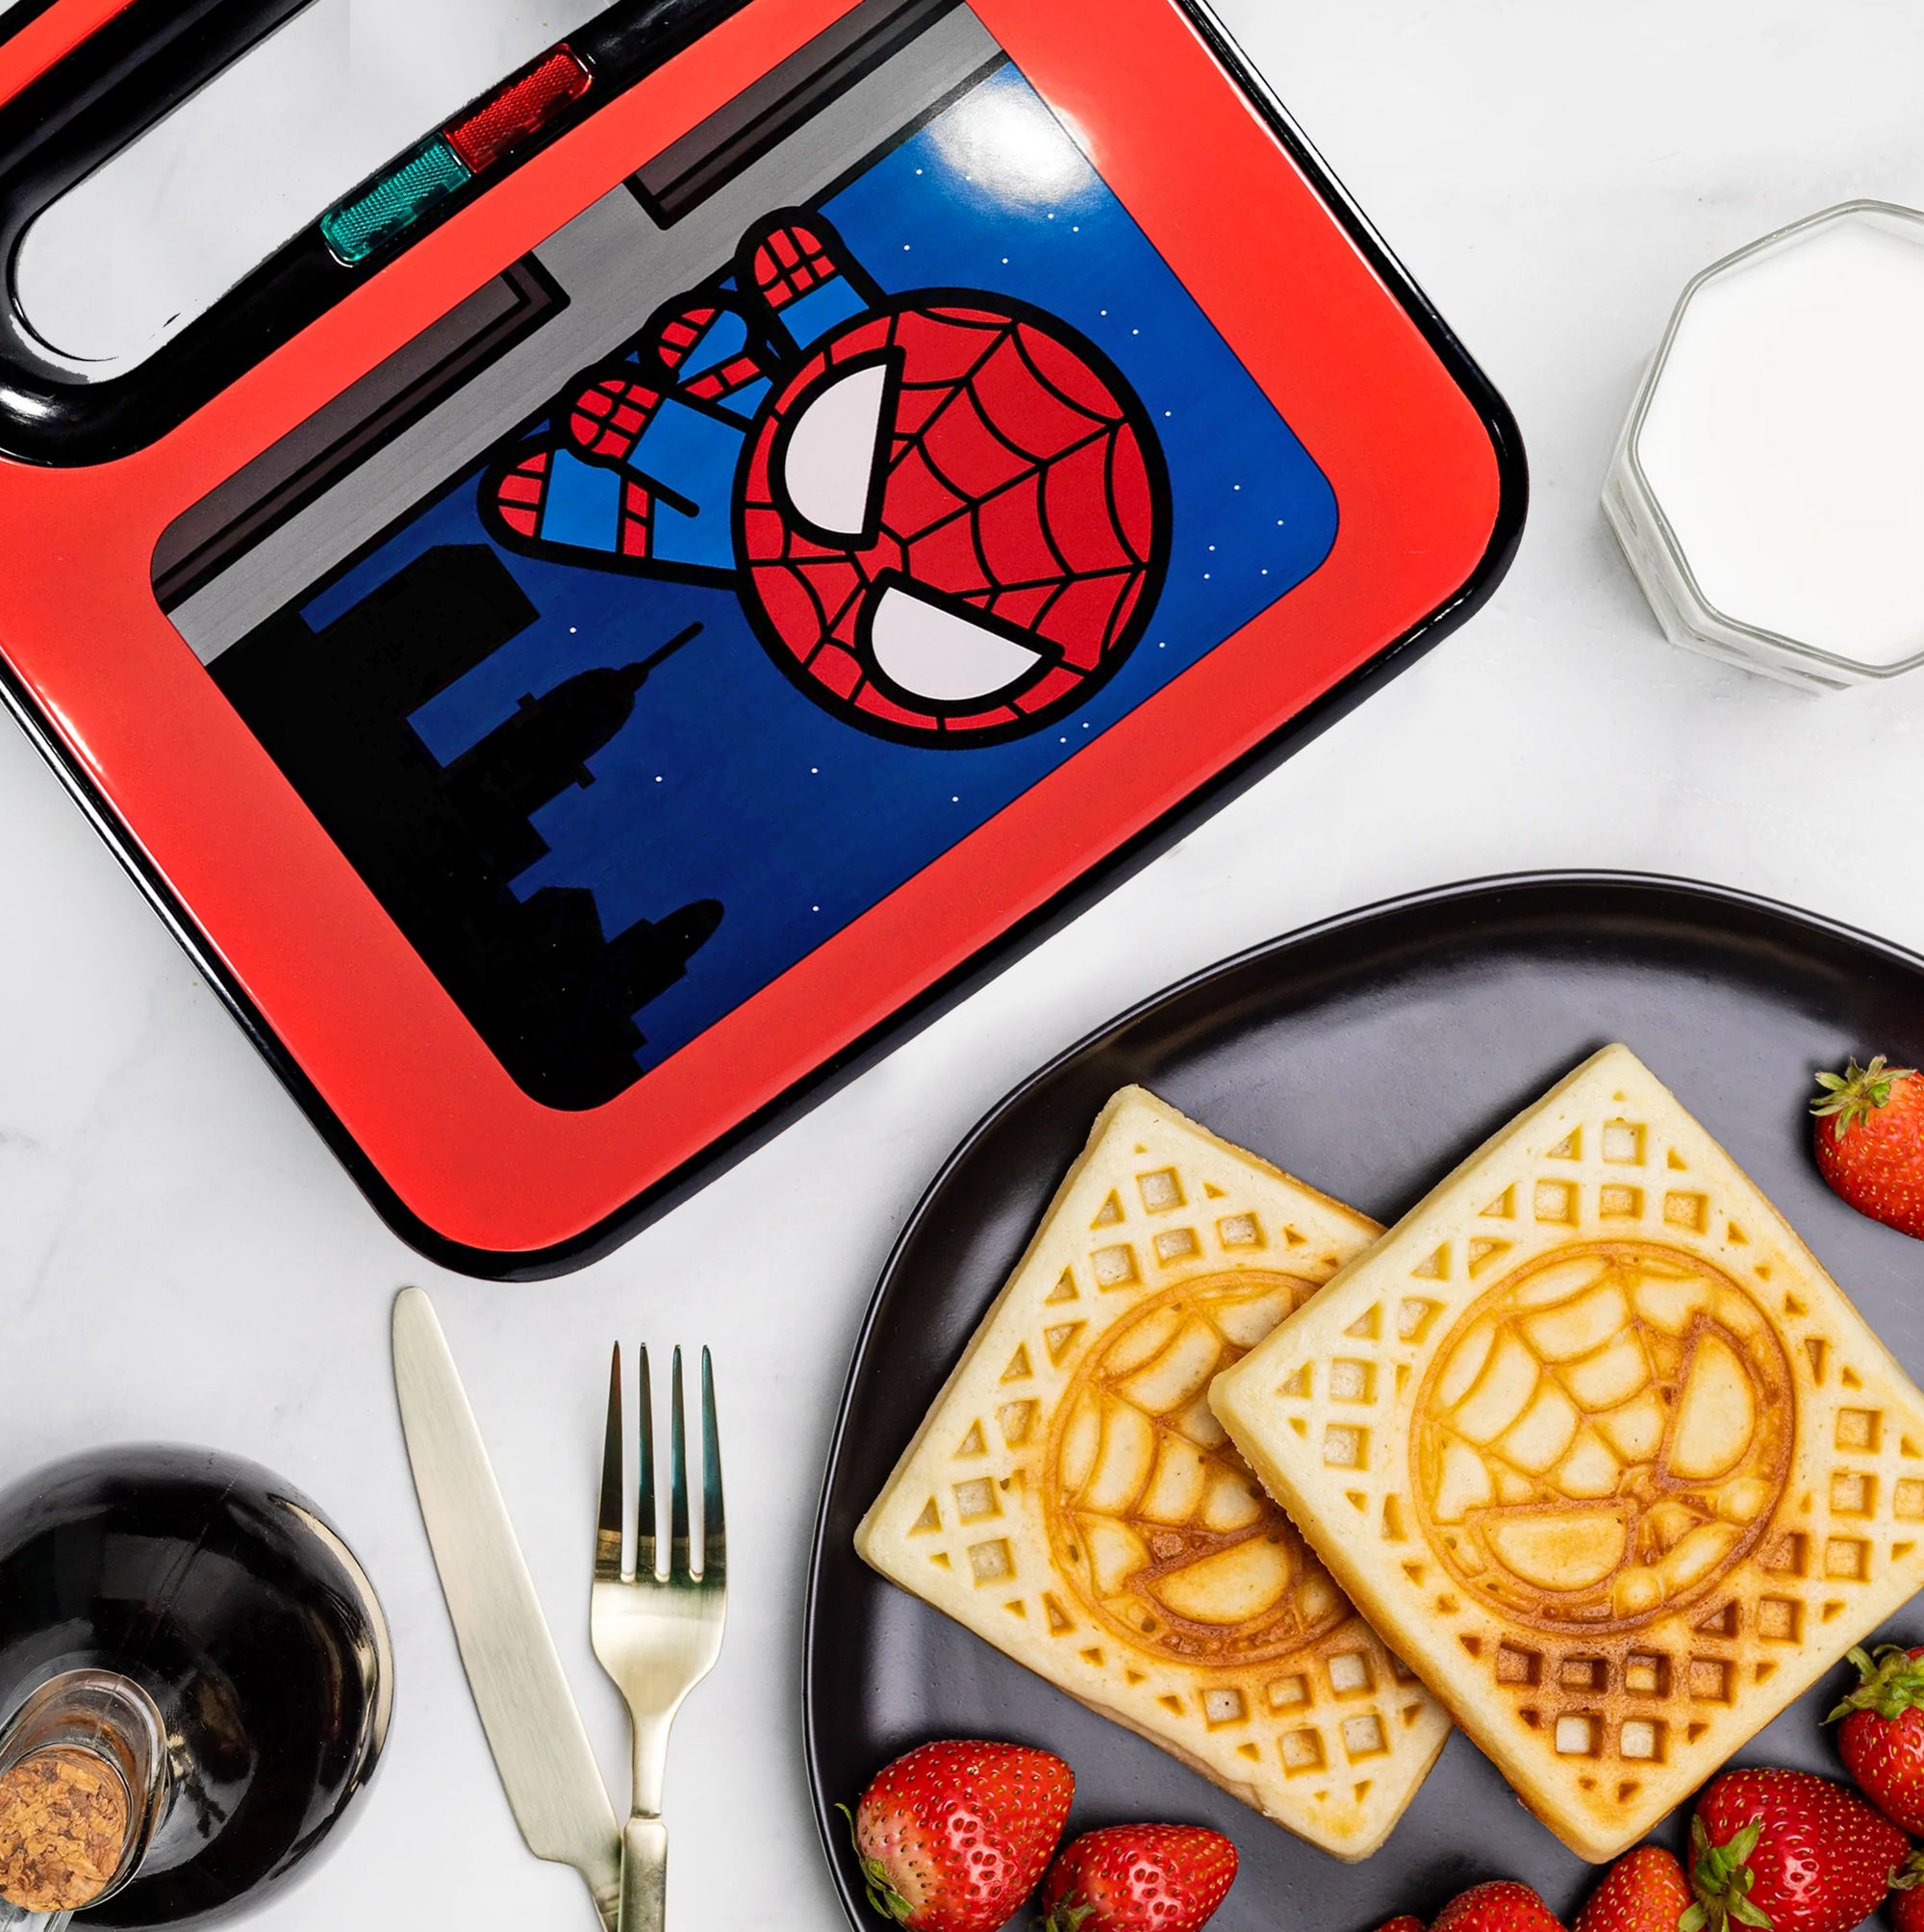 Baby Groot Face (Guardians of the Galaxy) Marvel Avengers Waffle Maker –  Collector's Outpost